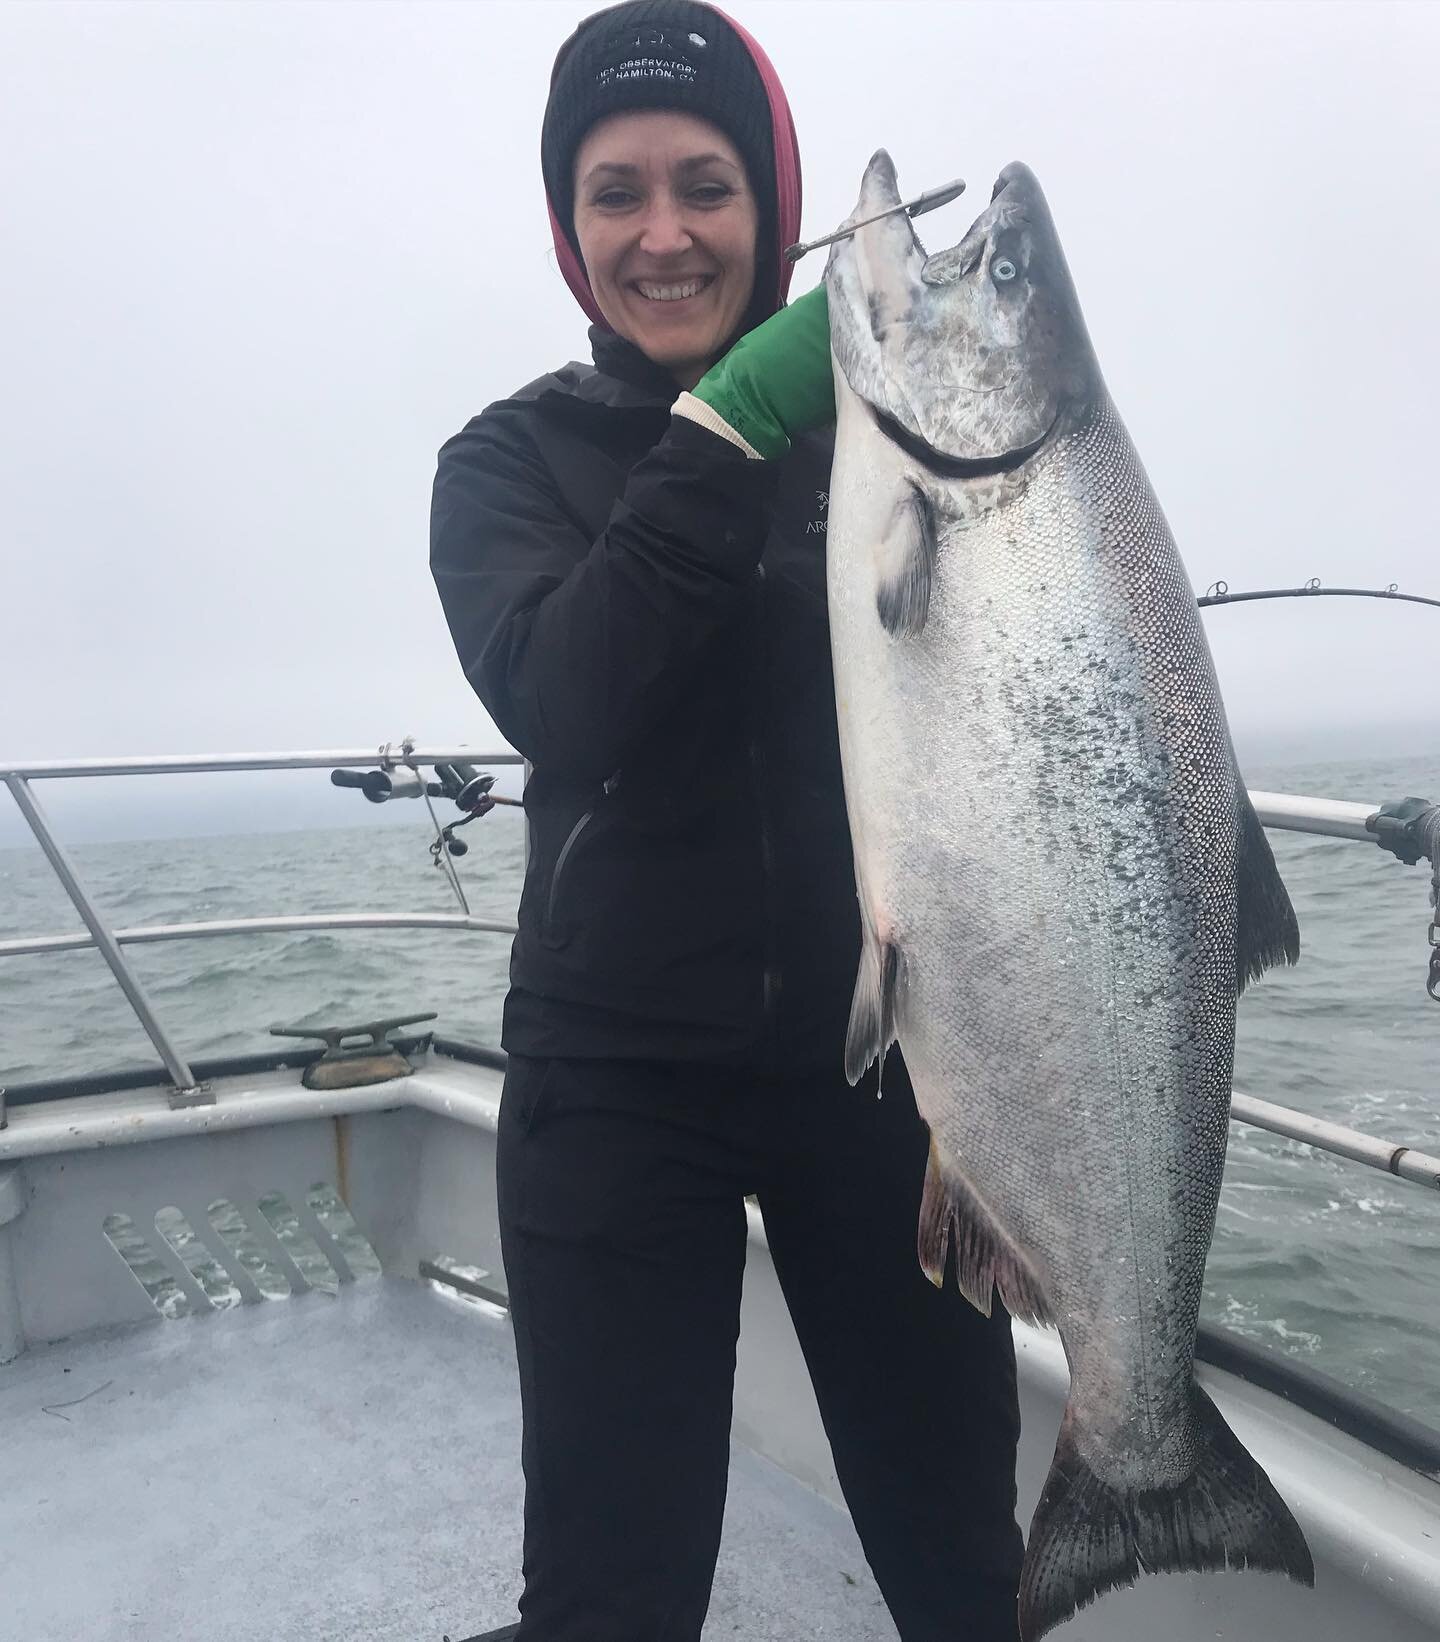 Nice 29 pounder from the other day! But today our 7 anglers finished the just 3 shy of limits. 11 salmon to 12 lbs! The bite has been a little slow lately so it&rsquo;s so important to work your gear and check your bait! And watch your rod! If you go